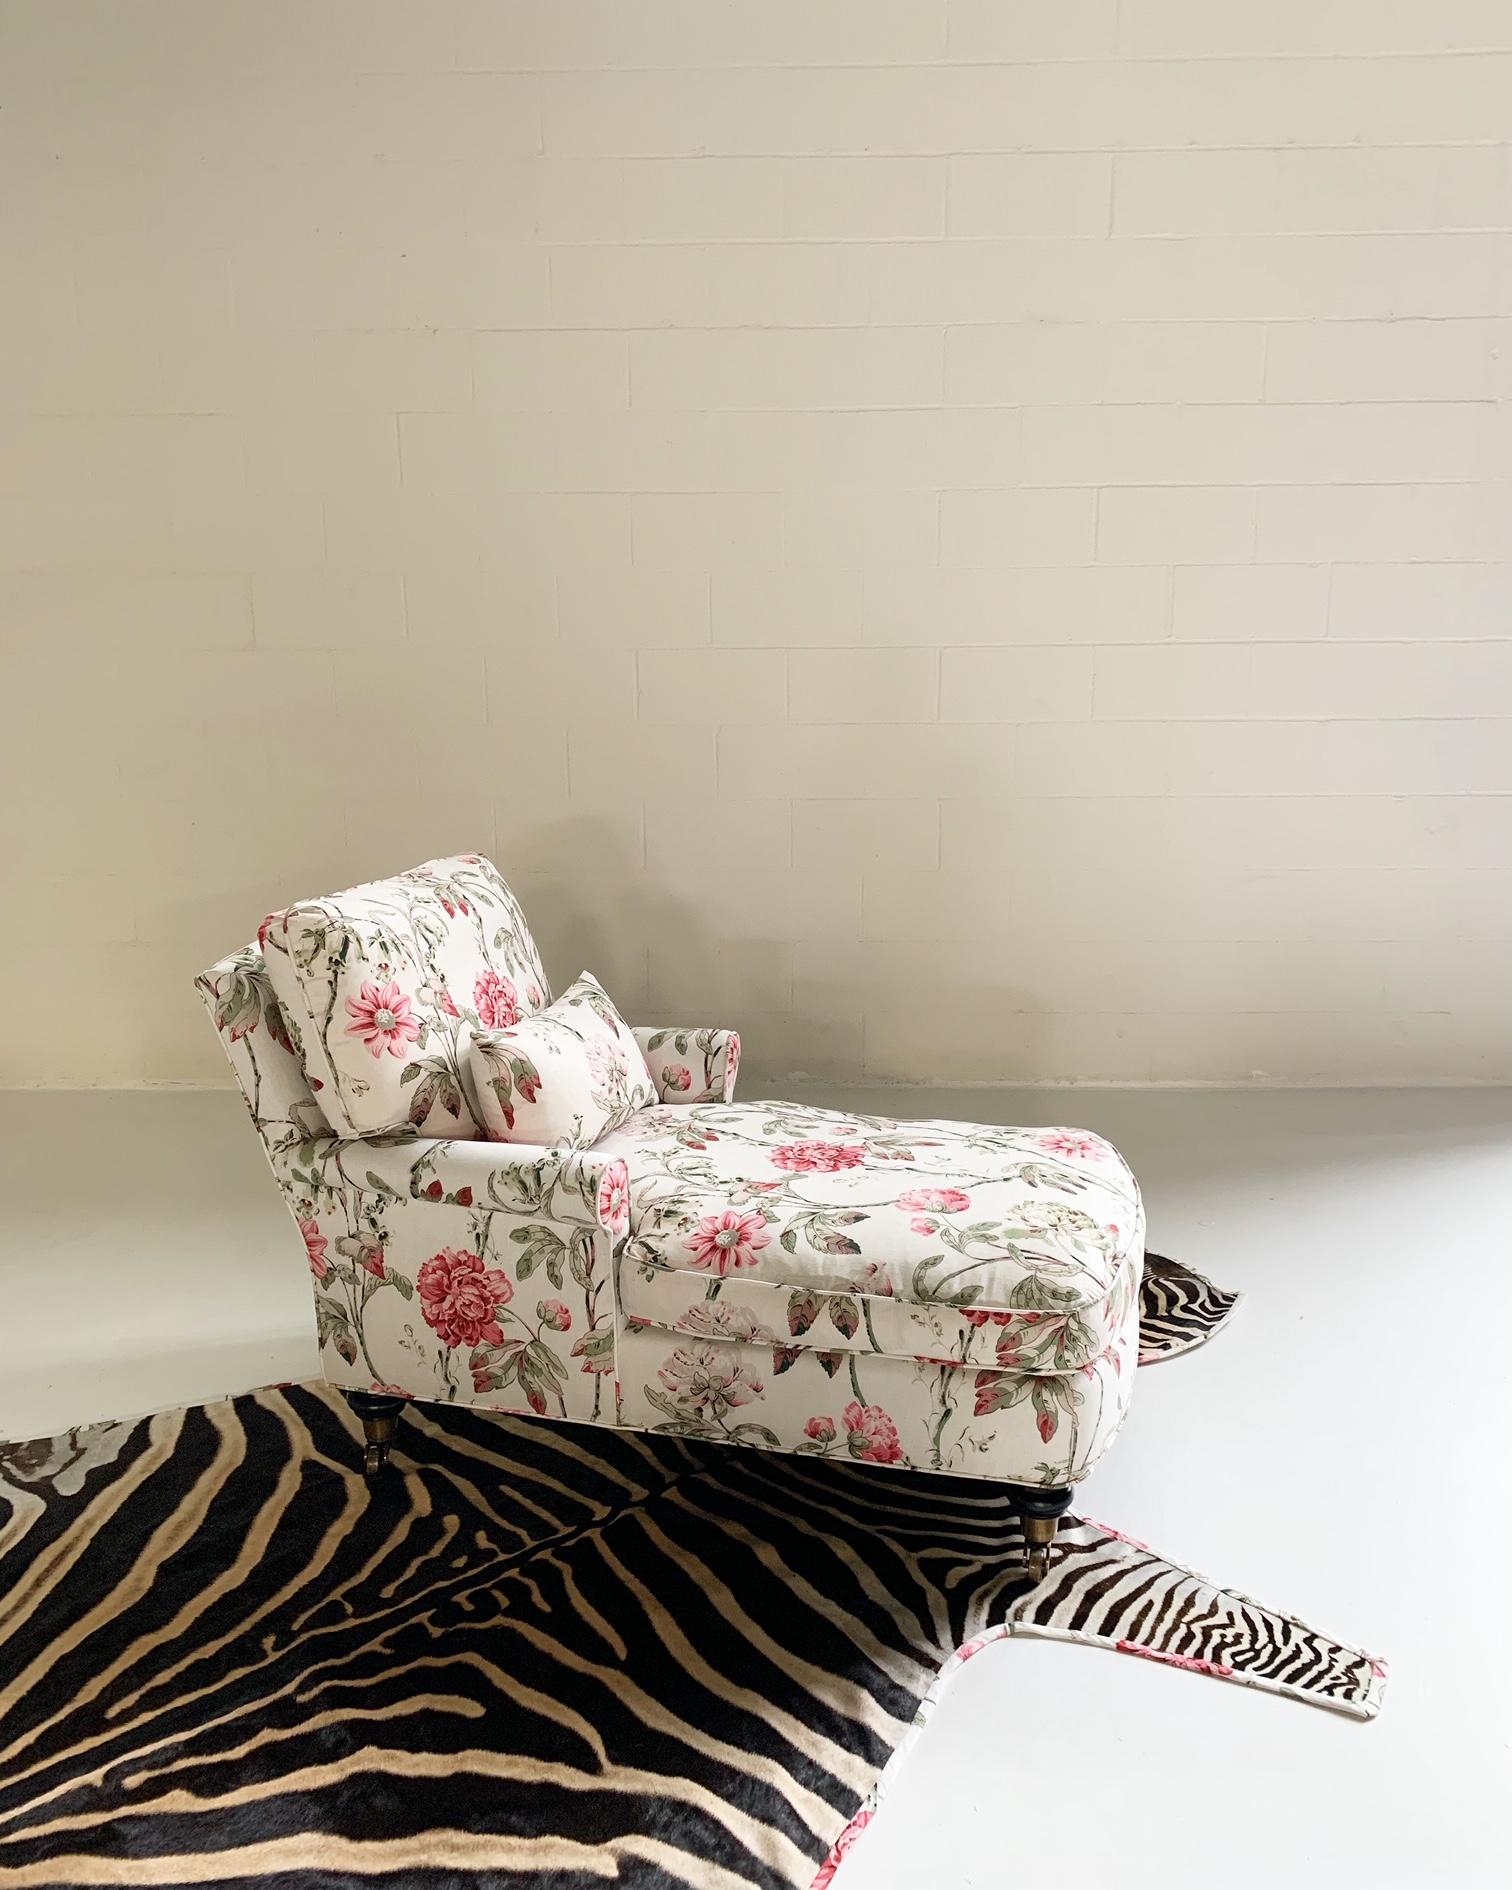 Inspired by the chintzy florals on the set of 1985s Out of Africa, our designers chose Schumacher's Daydream fabric in Fuschia colorway for this traditional chaise lounge. Restored from the bones out with lots and lots of feathers, we nixed the